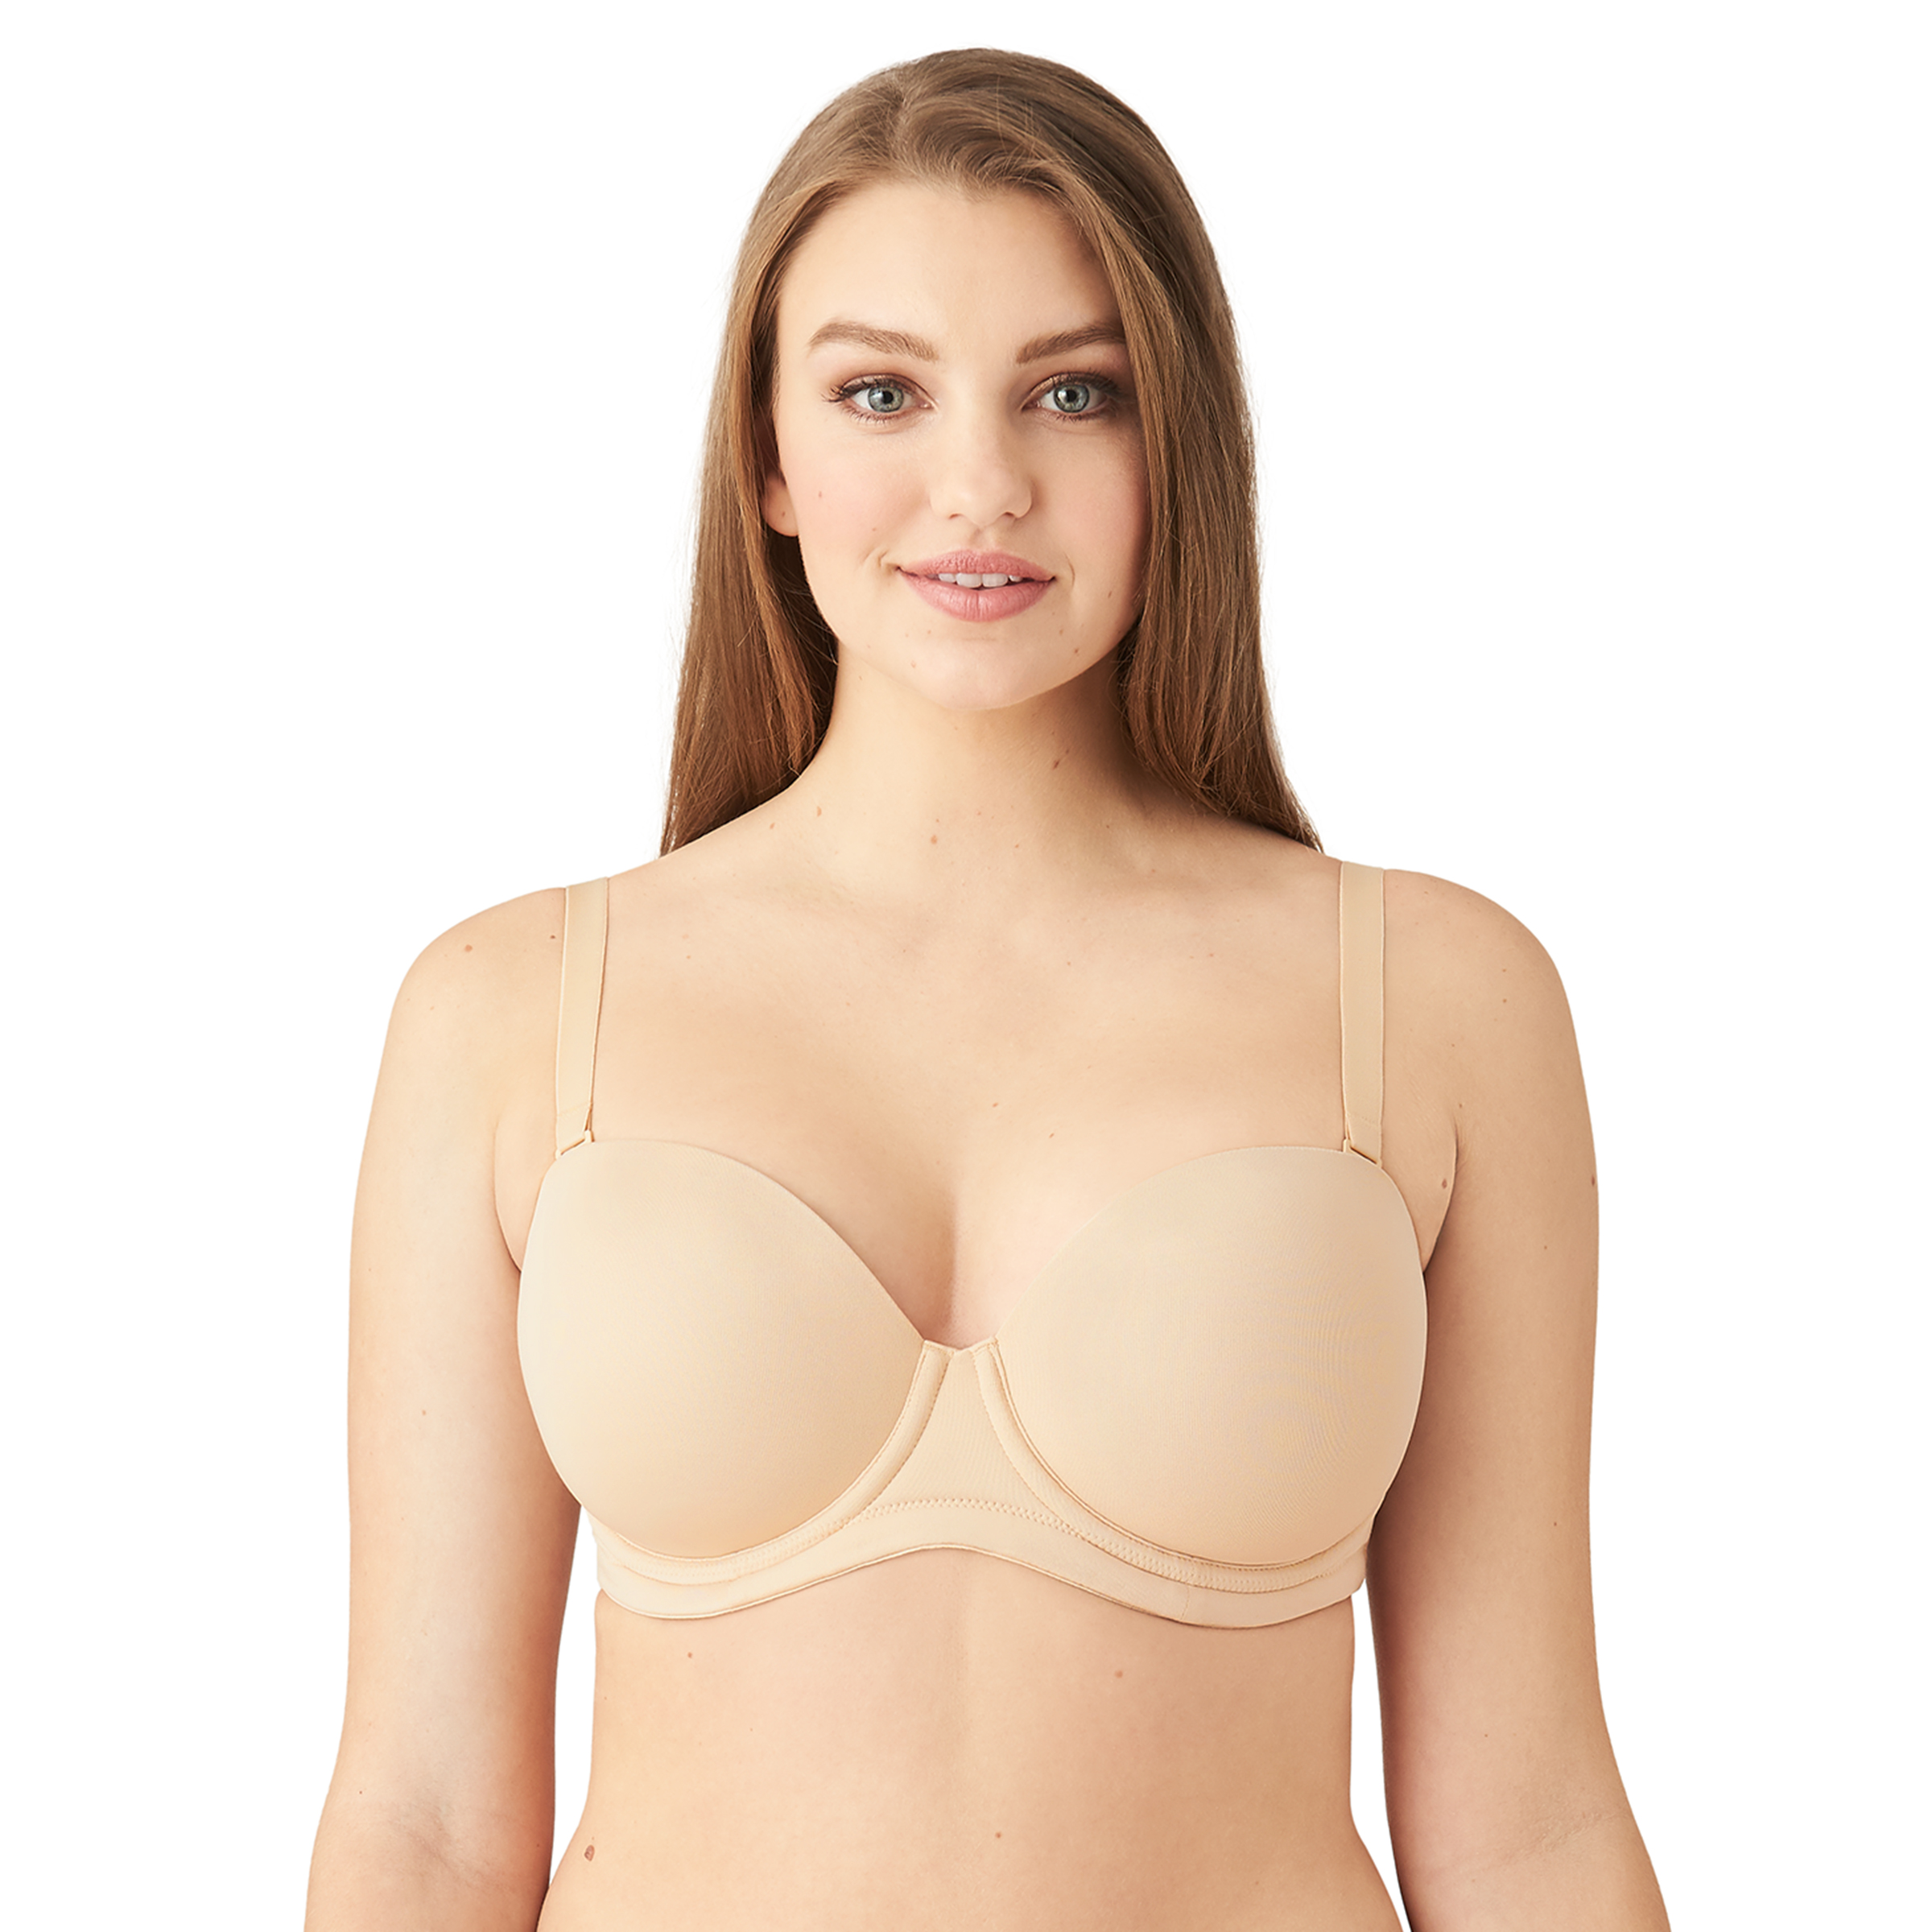 Wacoal 852210 Visual Effects No Wire Minimizer [852210] : Bras, Nursing Bras,  Shapers, Slips, Panties, All-In-Ones, Camisoles WOB Lingerie